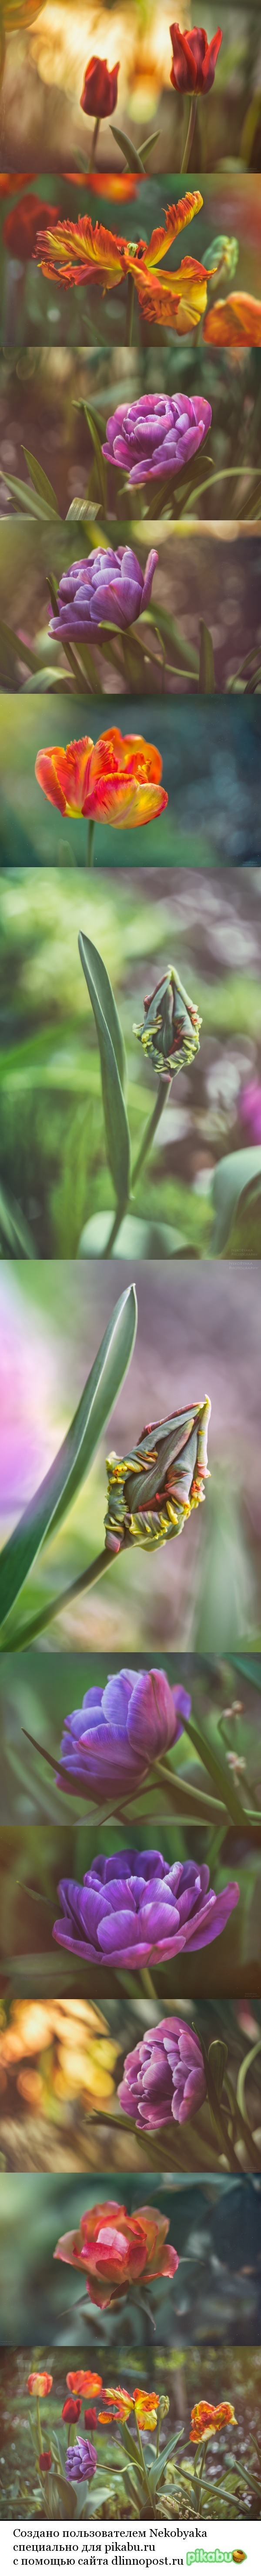 Flowers and sunset - My, The photo, Flowers, Tulips, Sunset, Nature, Helios44-2, the Rose, Bokeh, Longpost, Helios44-2